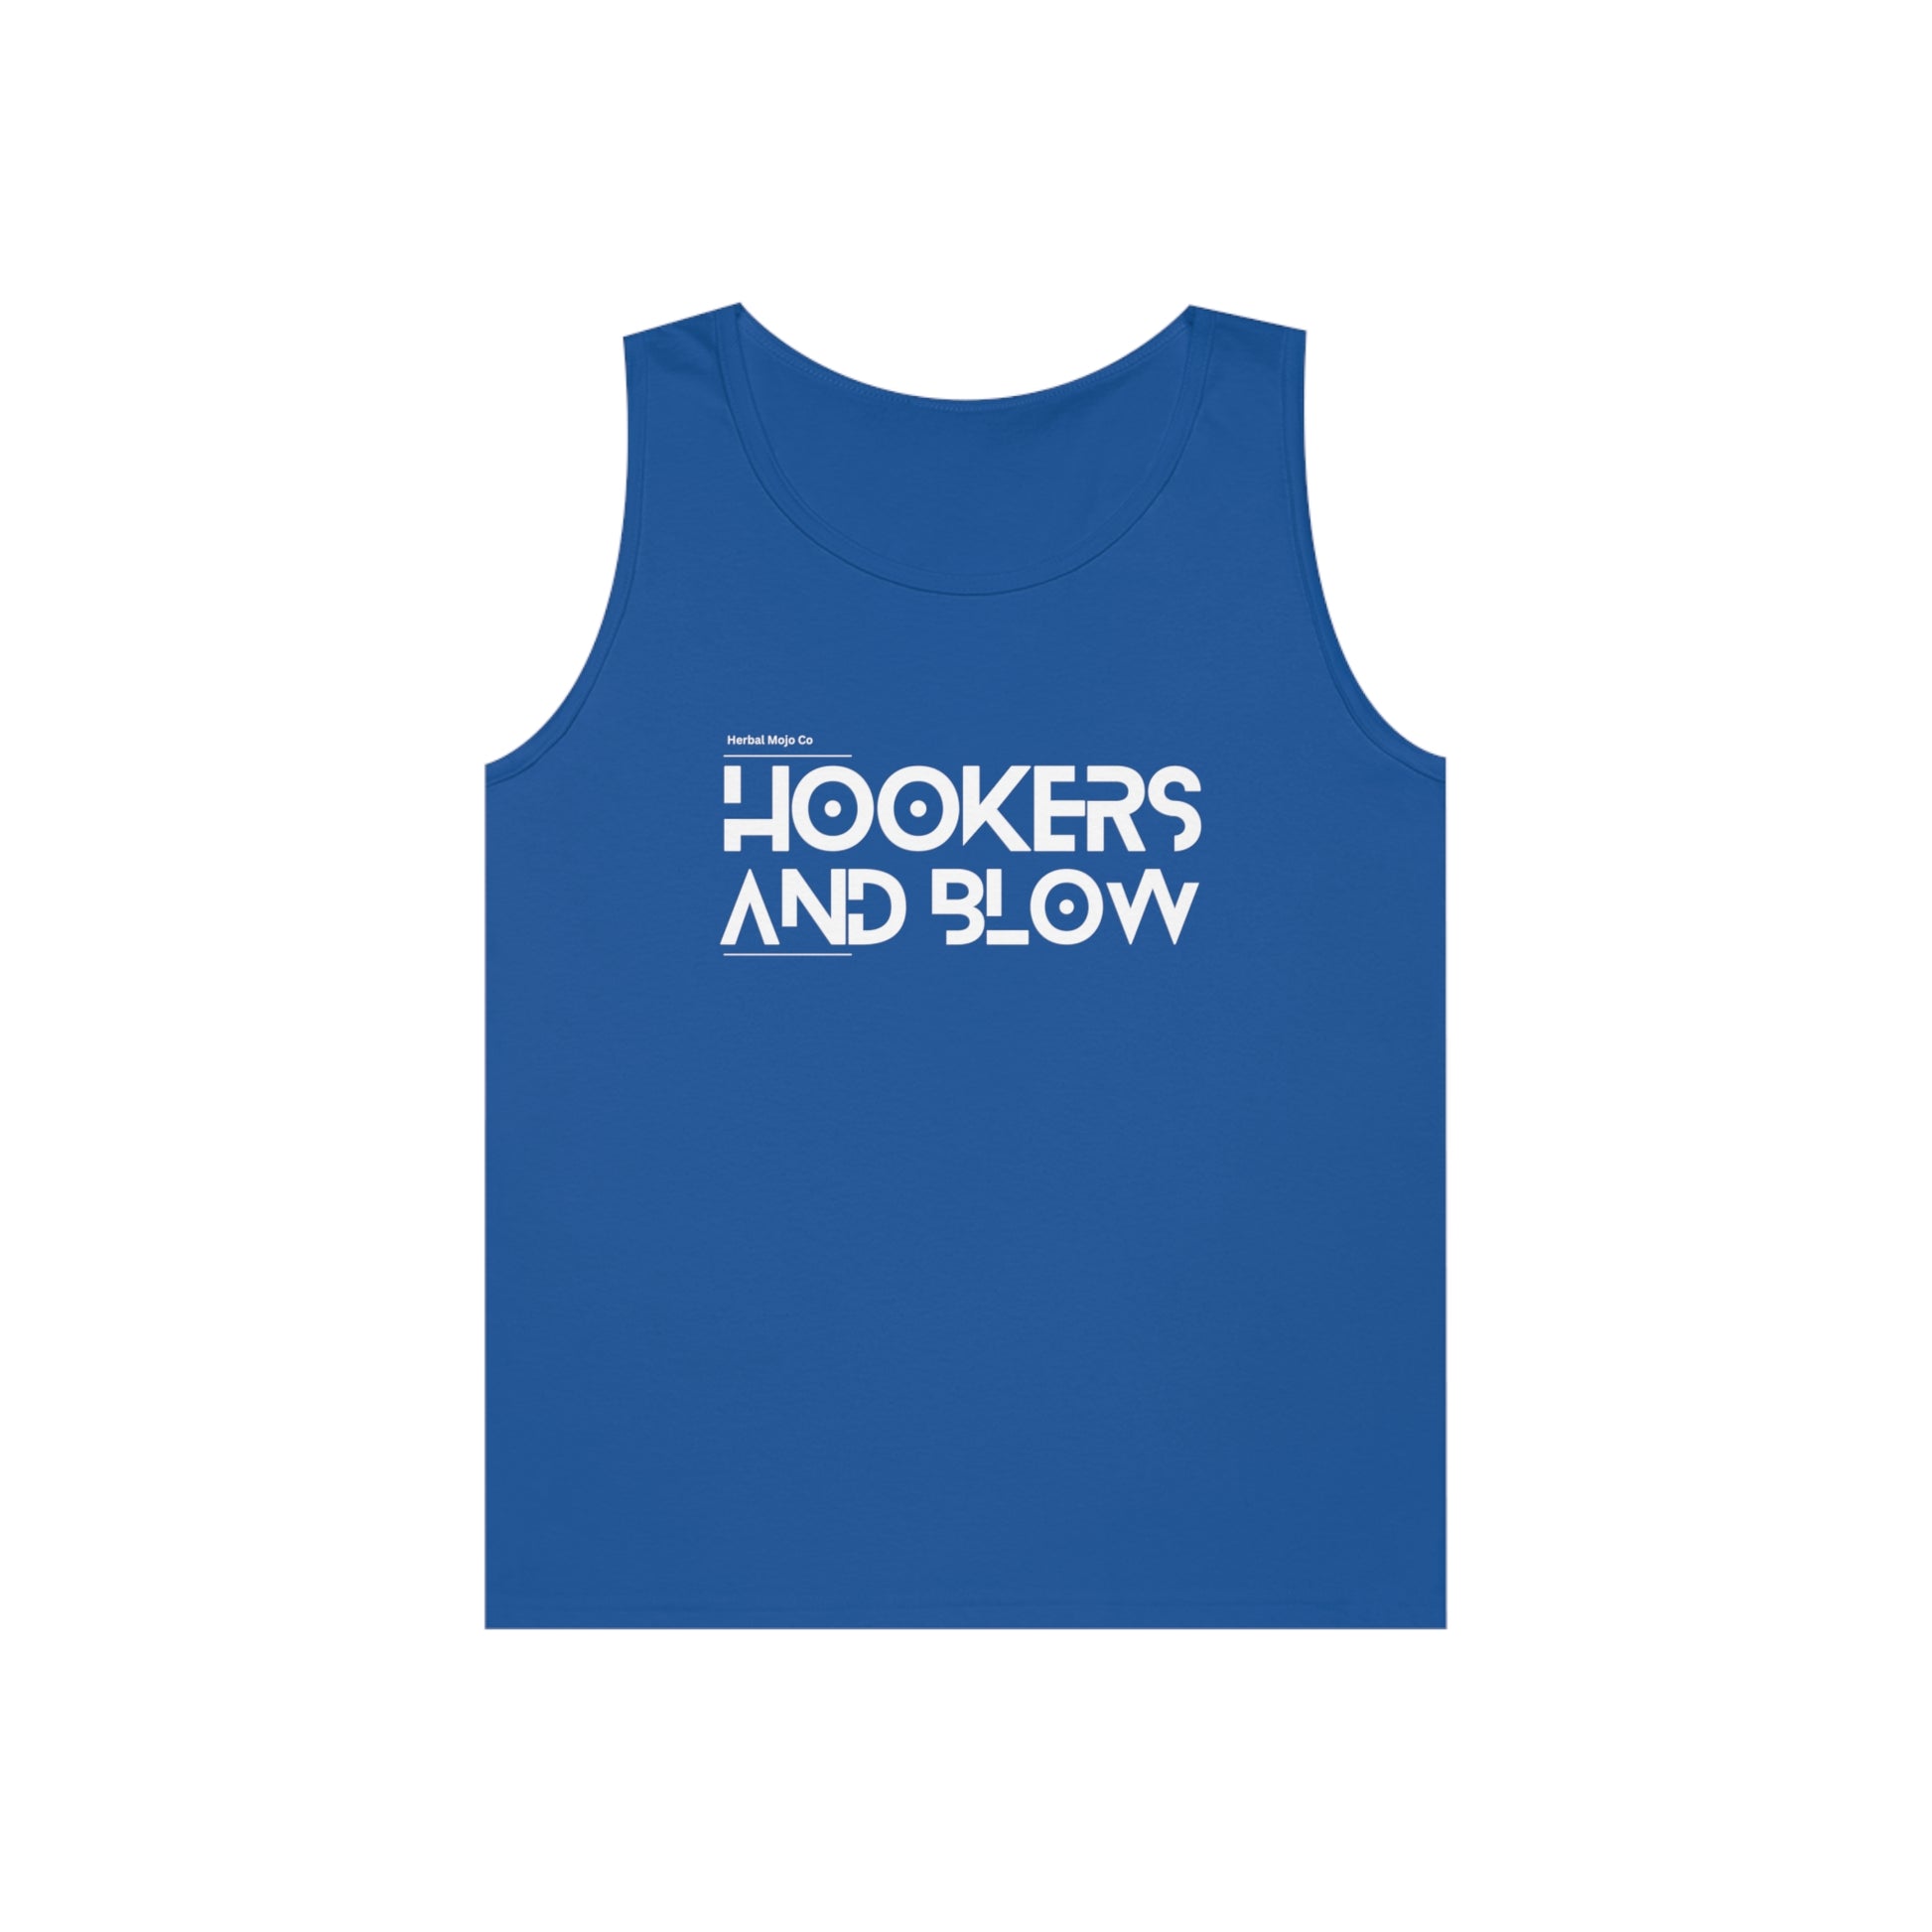 The Stamina for Men Hookers & Blow unisex Royal Blue cotton tank top product shot with white background